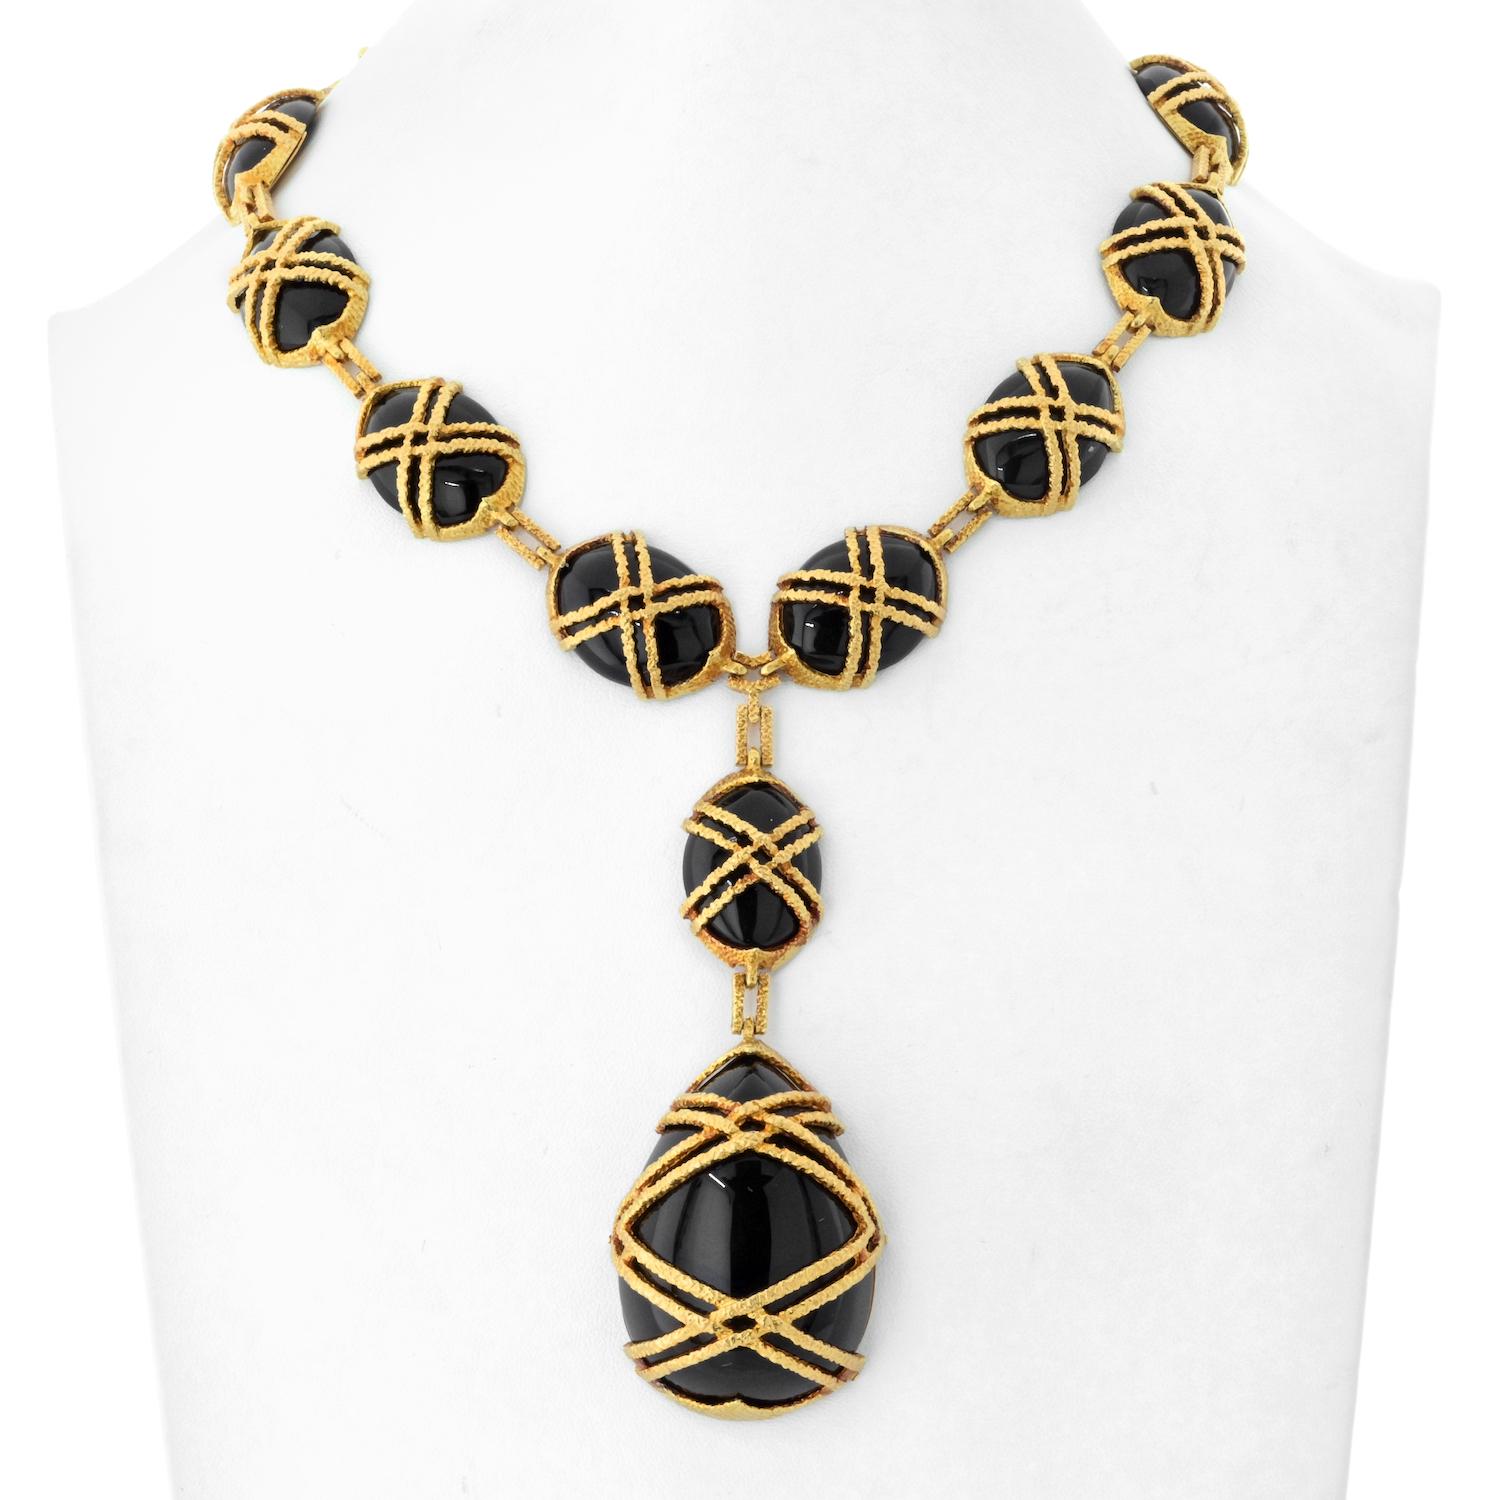 Presenting the epitome of timeless elegance: the Cartier 18K Yellow Gold 1969 Black Jade Necklace. Crafted to perfection, this exquisite piece exudes sophistication and luxury with its meticulously designed features.

The necklace is adorned with